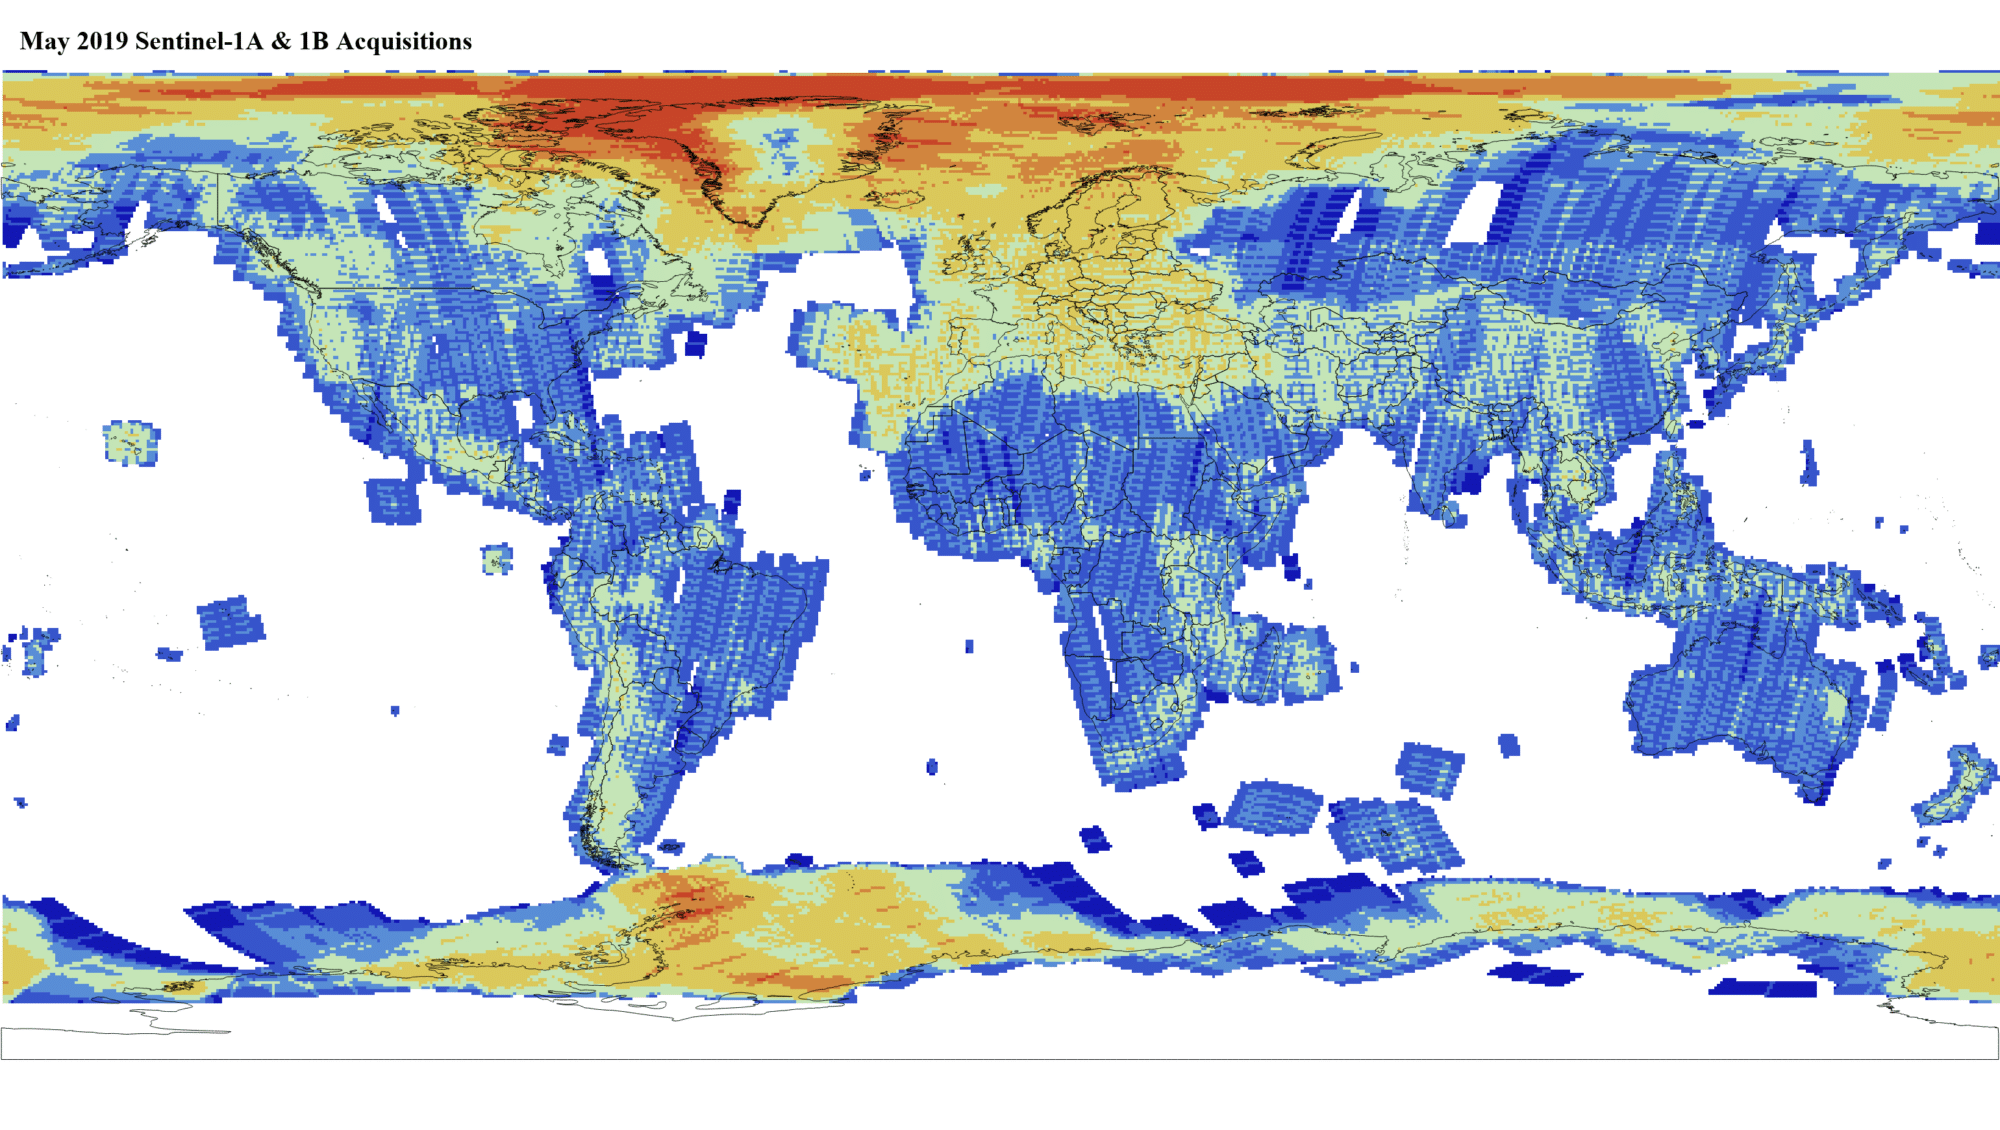 Heat map of Sentinel-1A and -1B GRD global acquisitions May 2019